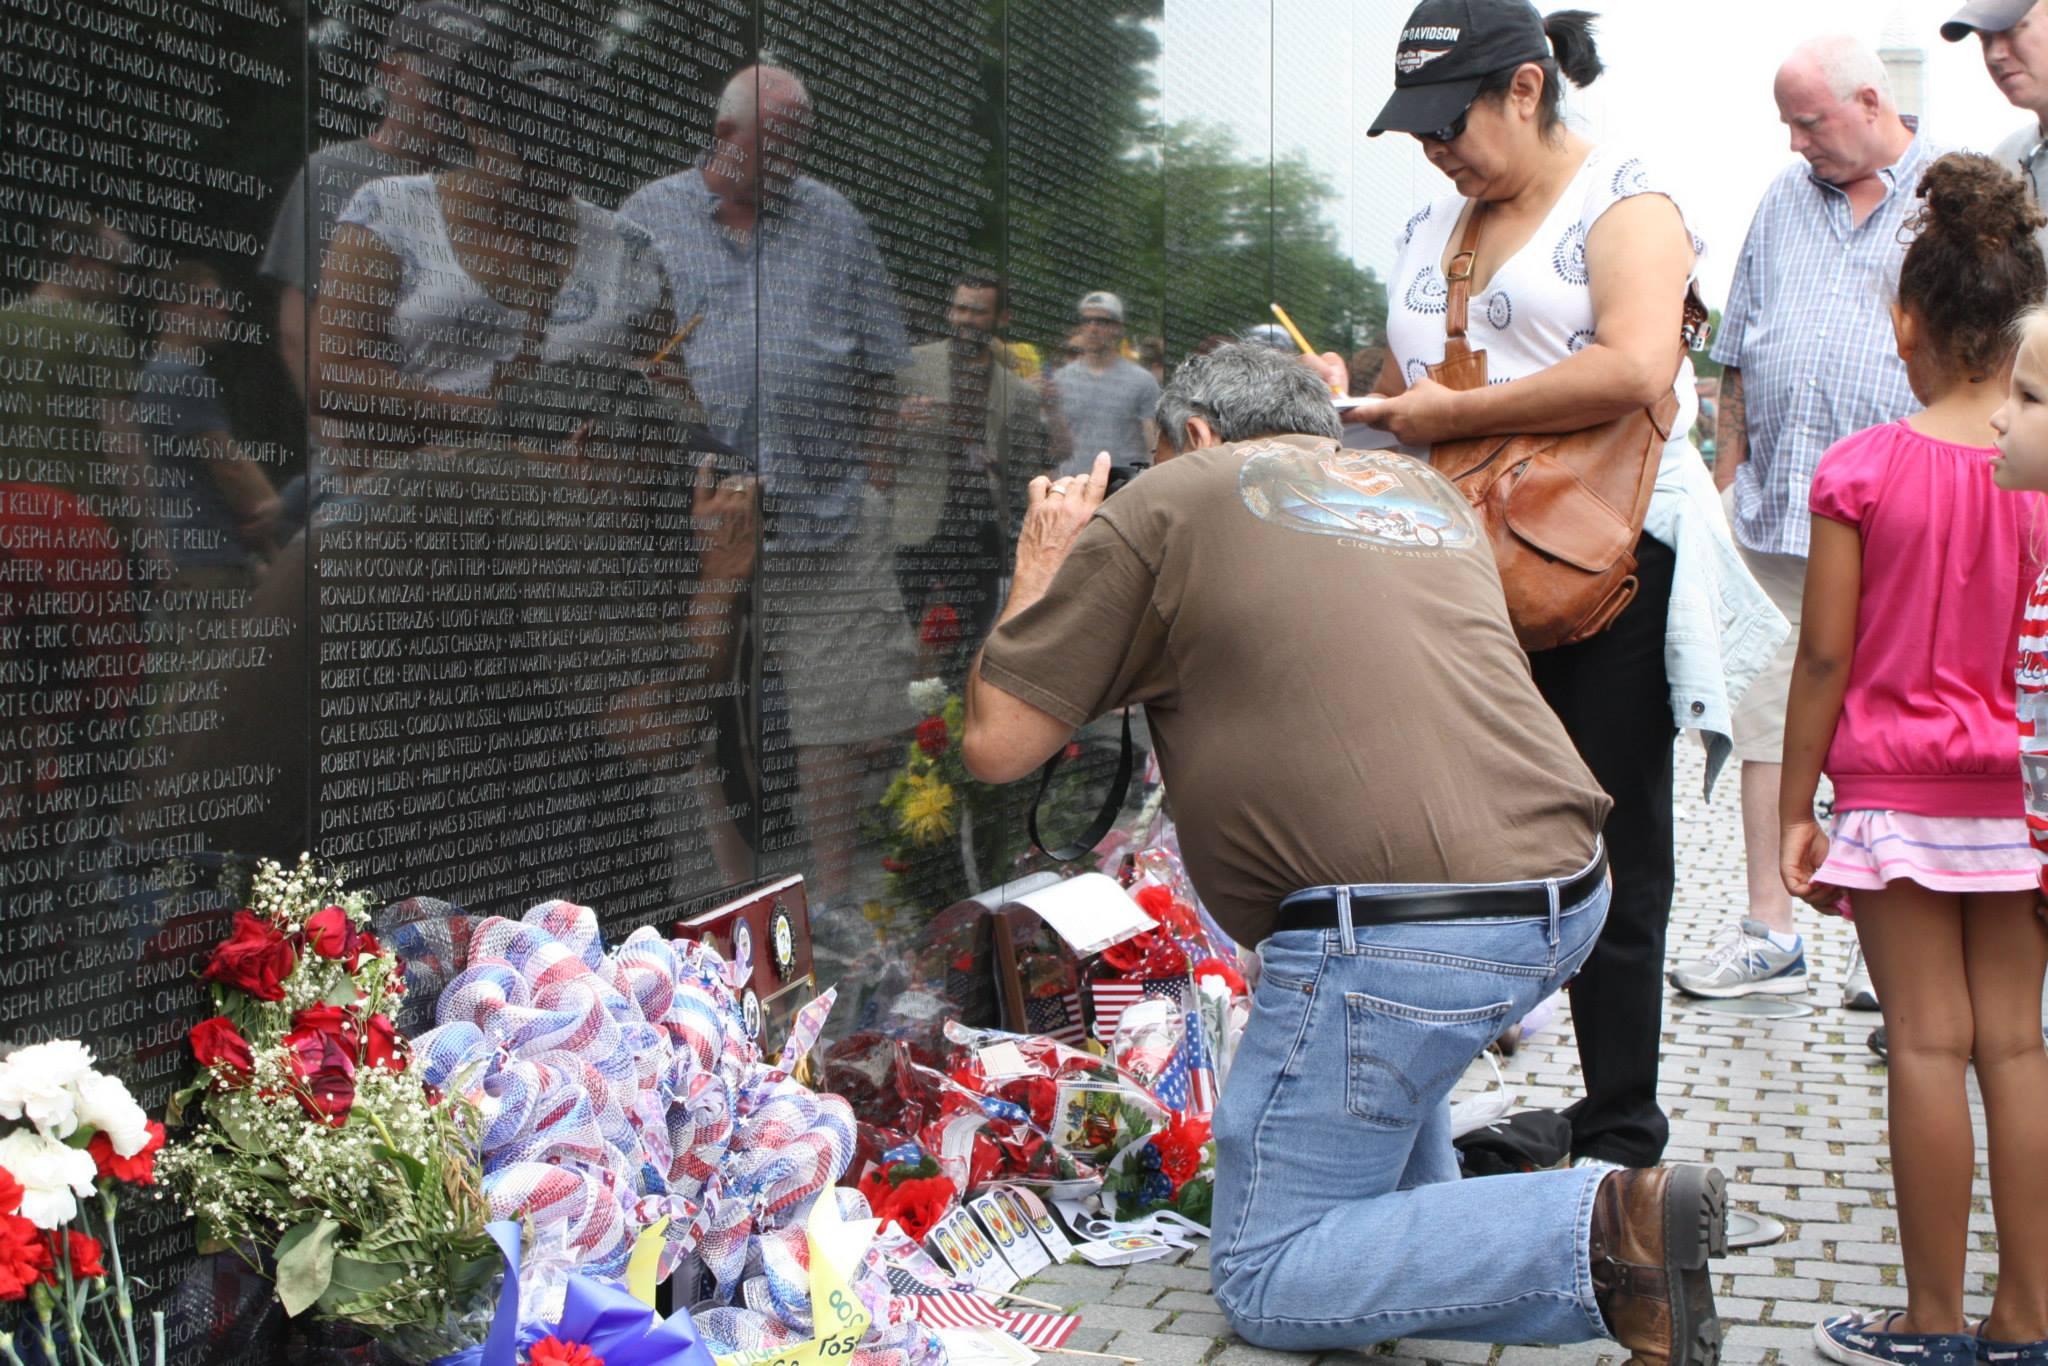 A man kneels and takes a photo of the wall surrounded by other people. Flowers are at the wall base.